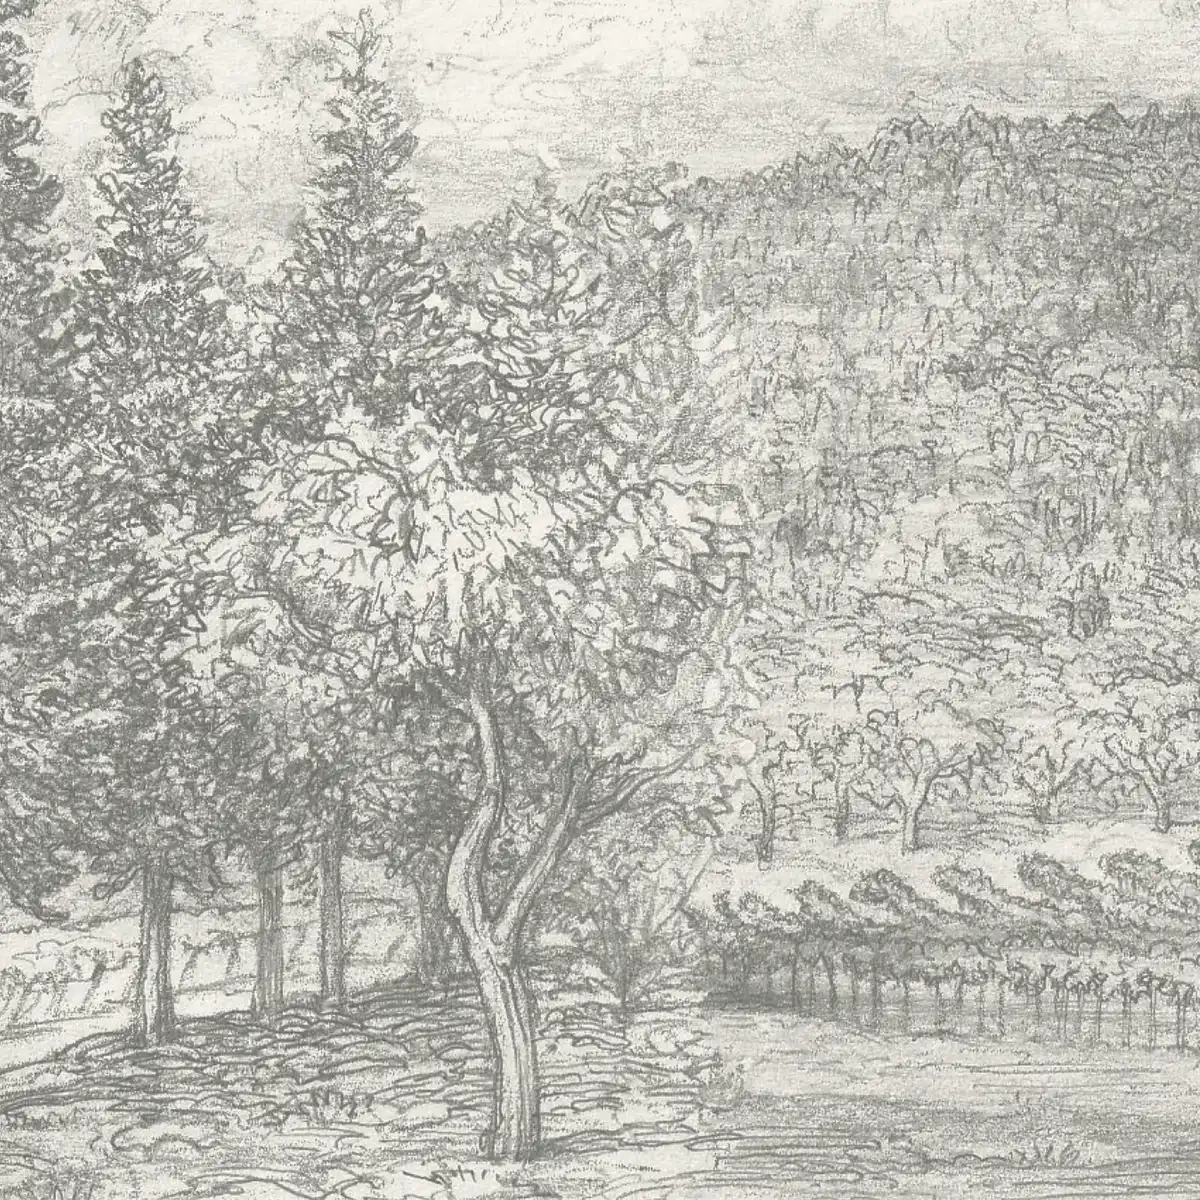 A black and white drawing of trees and a river.